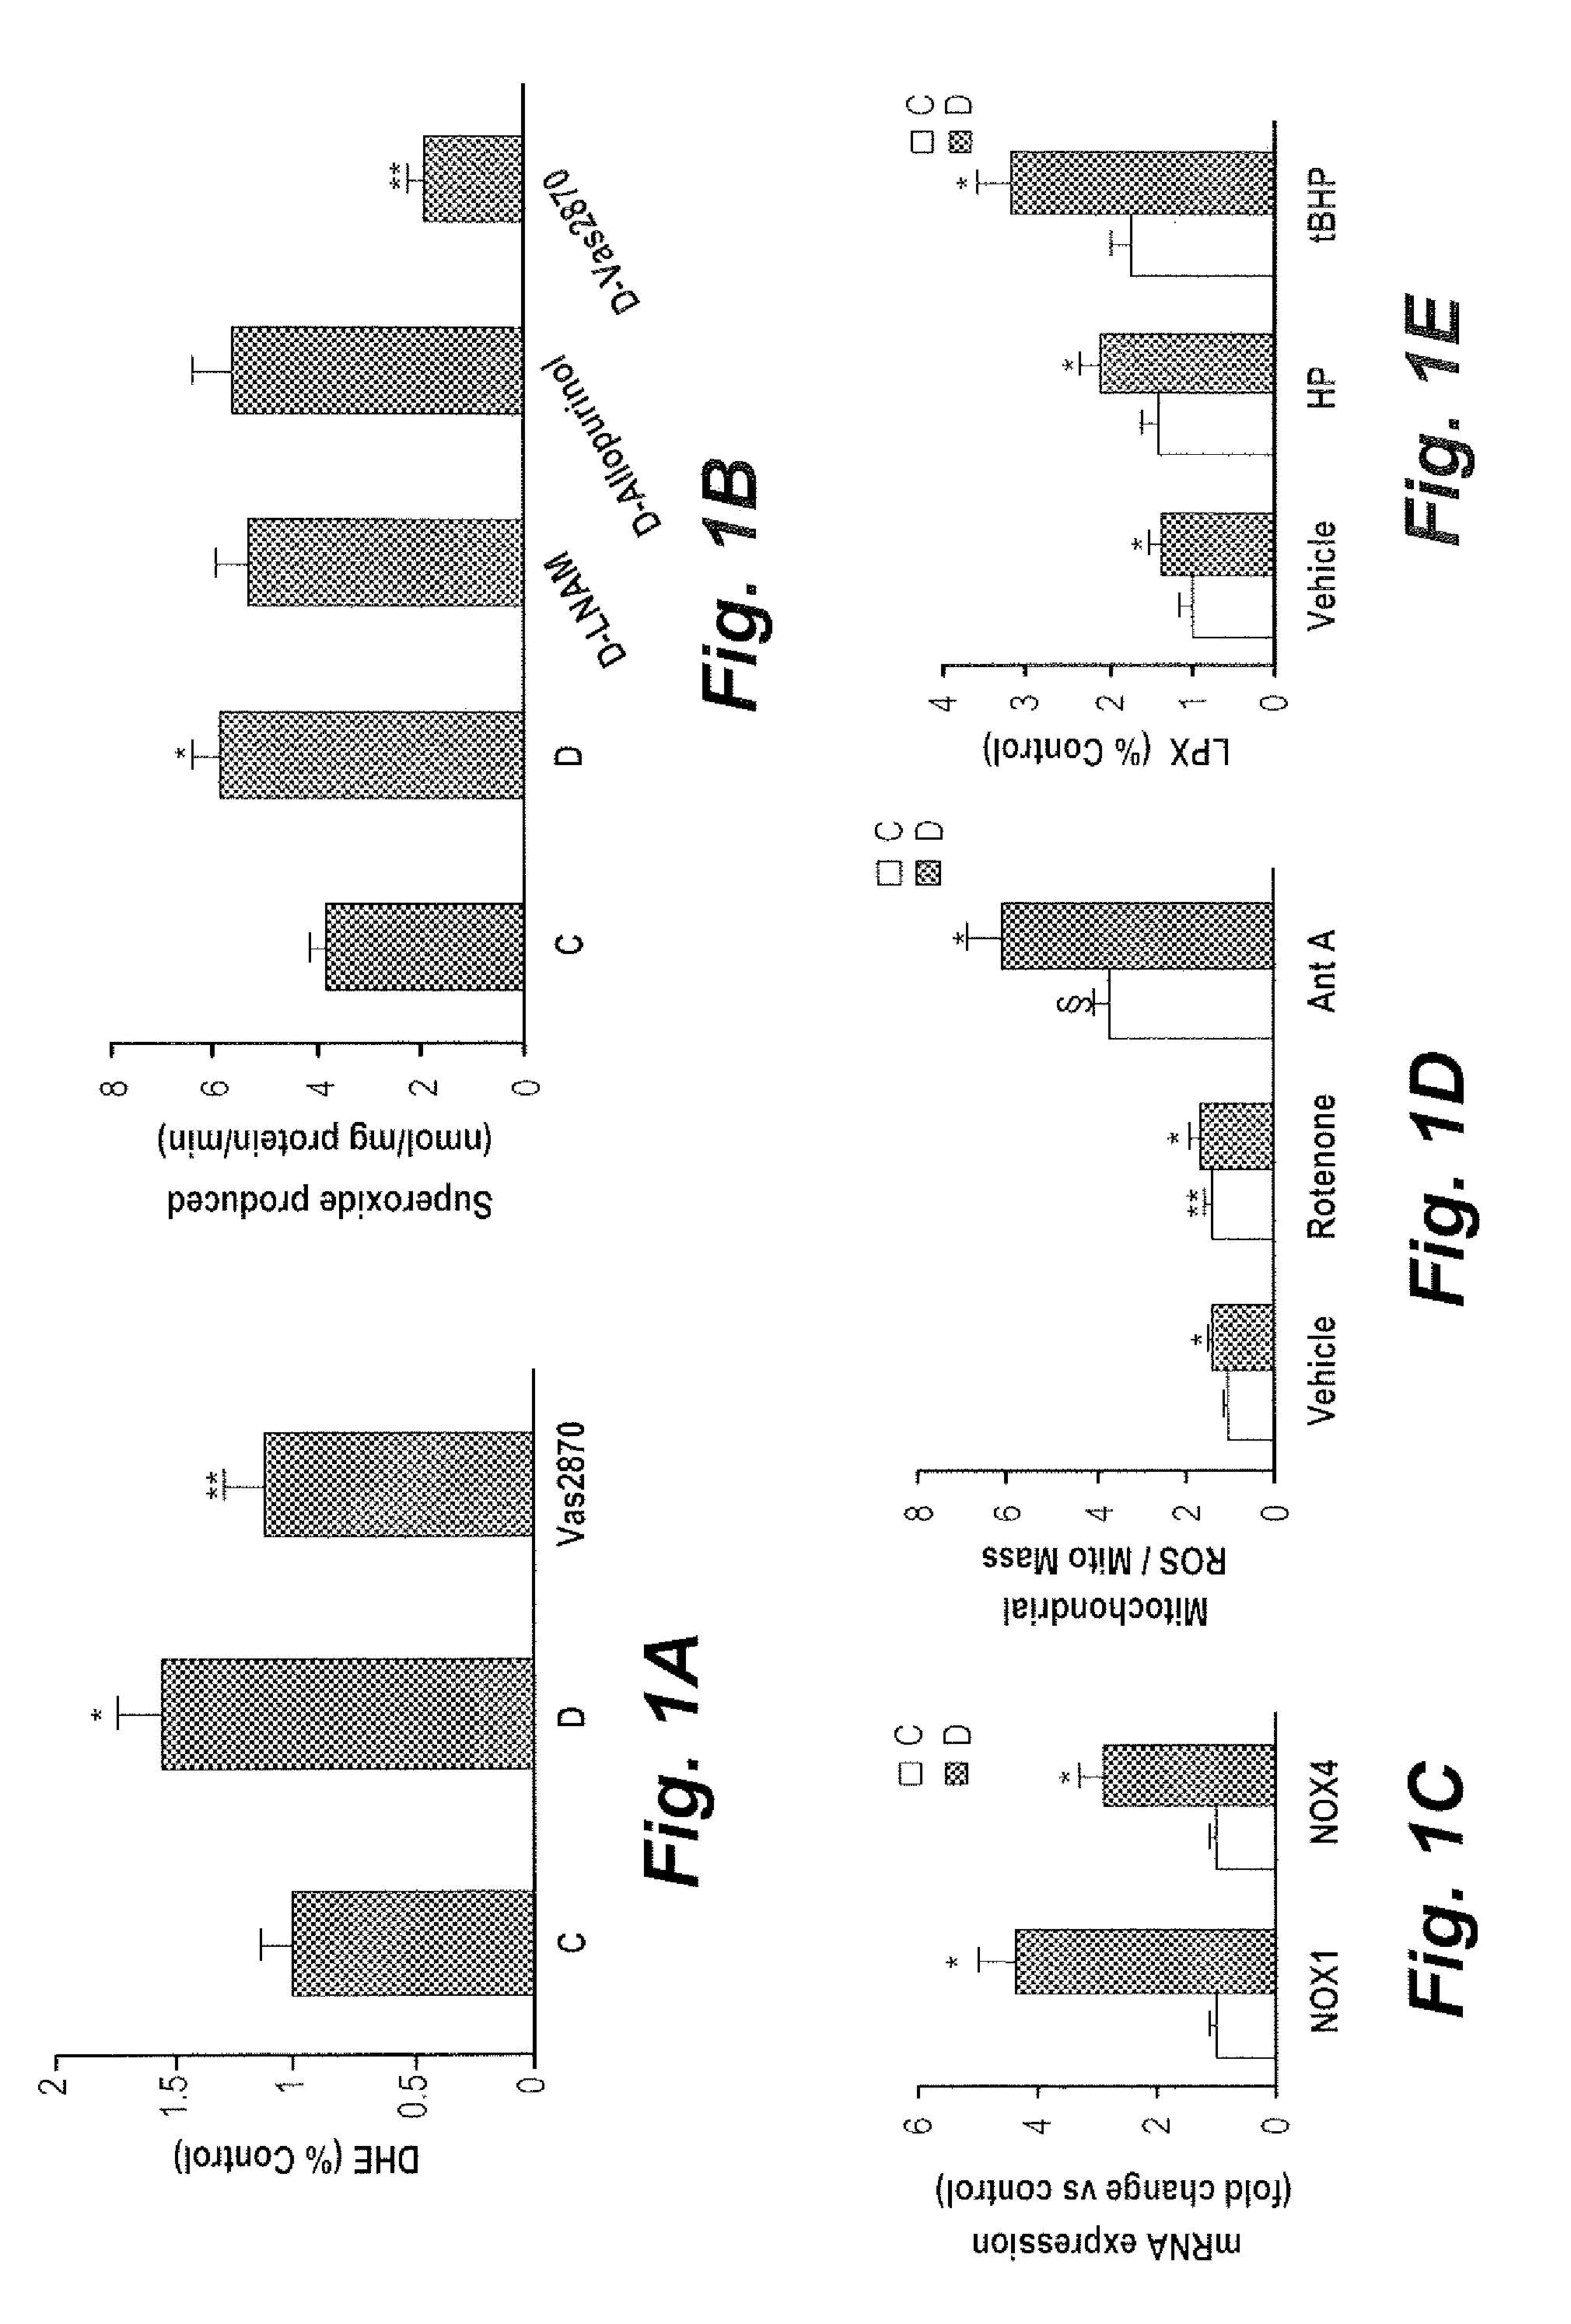 Method of treating impaired wound healing in diabetics